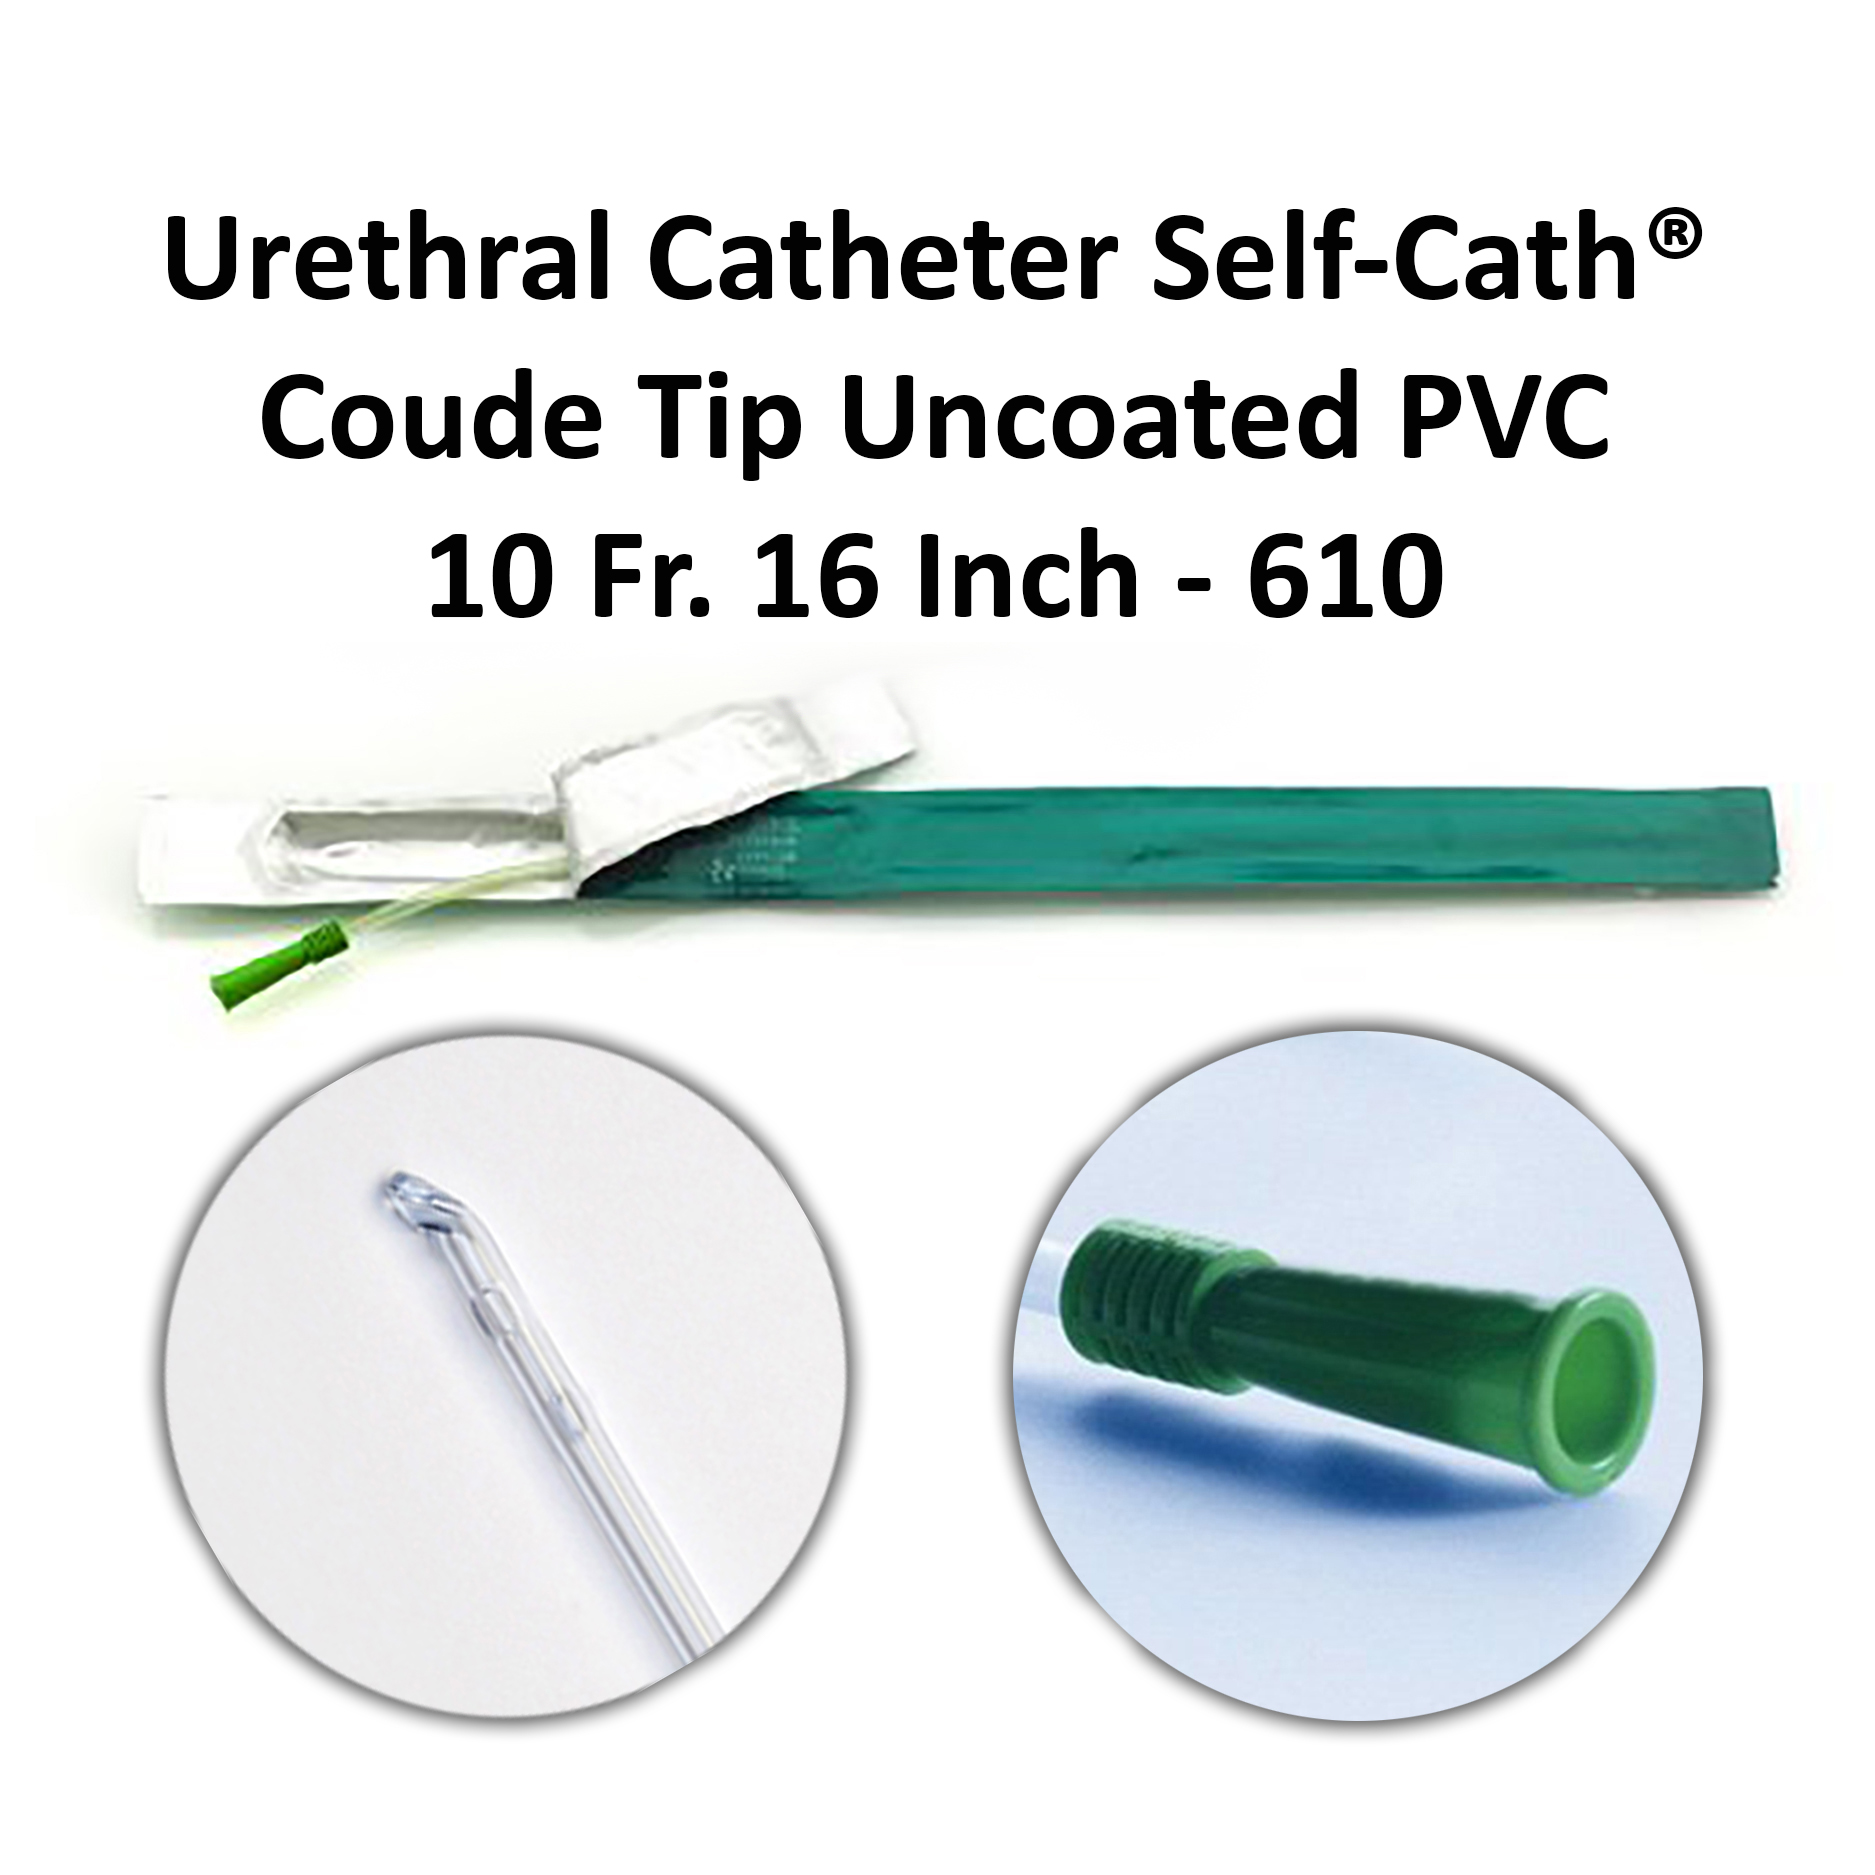 Urethral Catheter Self-Cath® Coude Tip Uncoated PVC 10 Fr. 16 Inch - 610